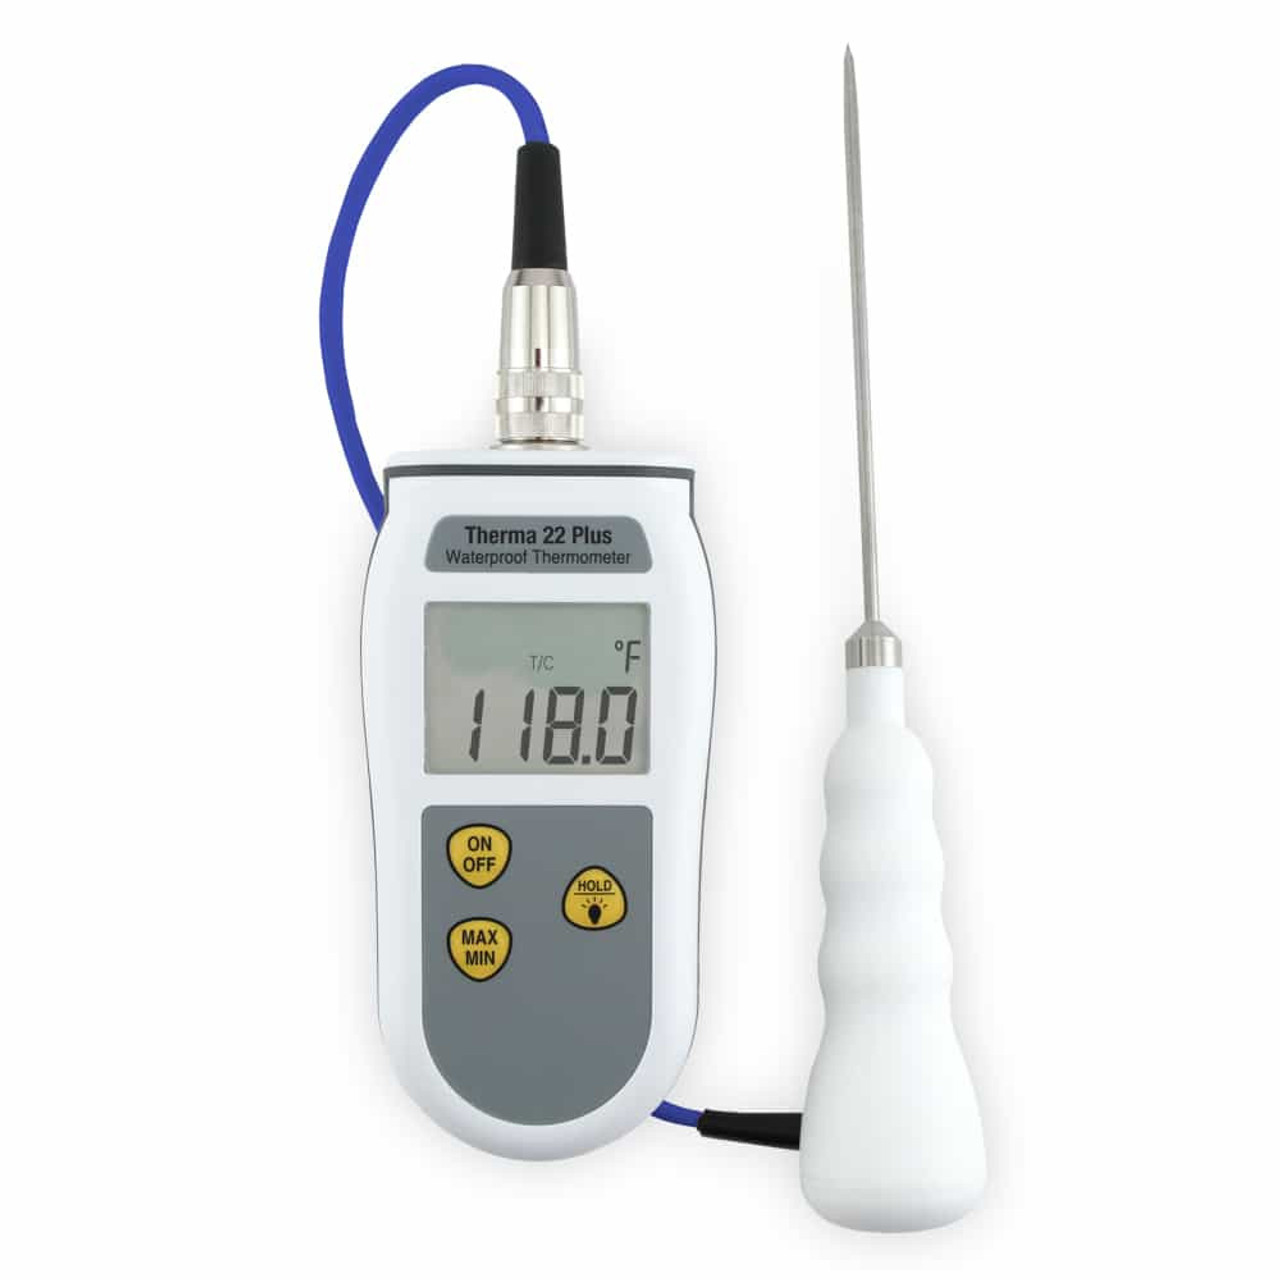 ThermoWorks Therma 20 Plus with 174-166 Probe Review